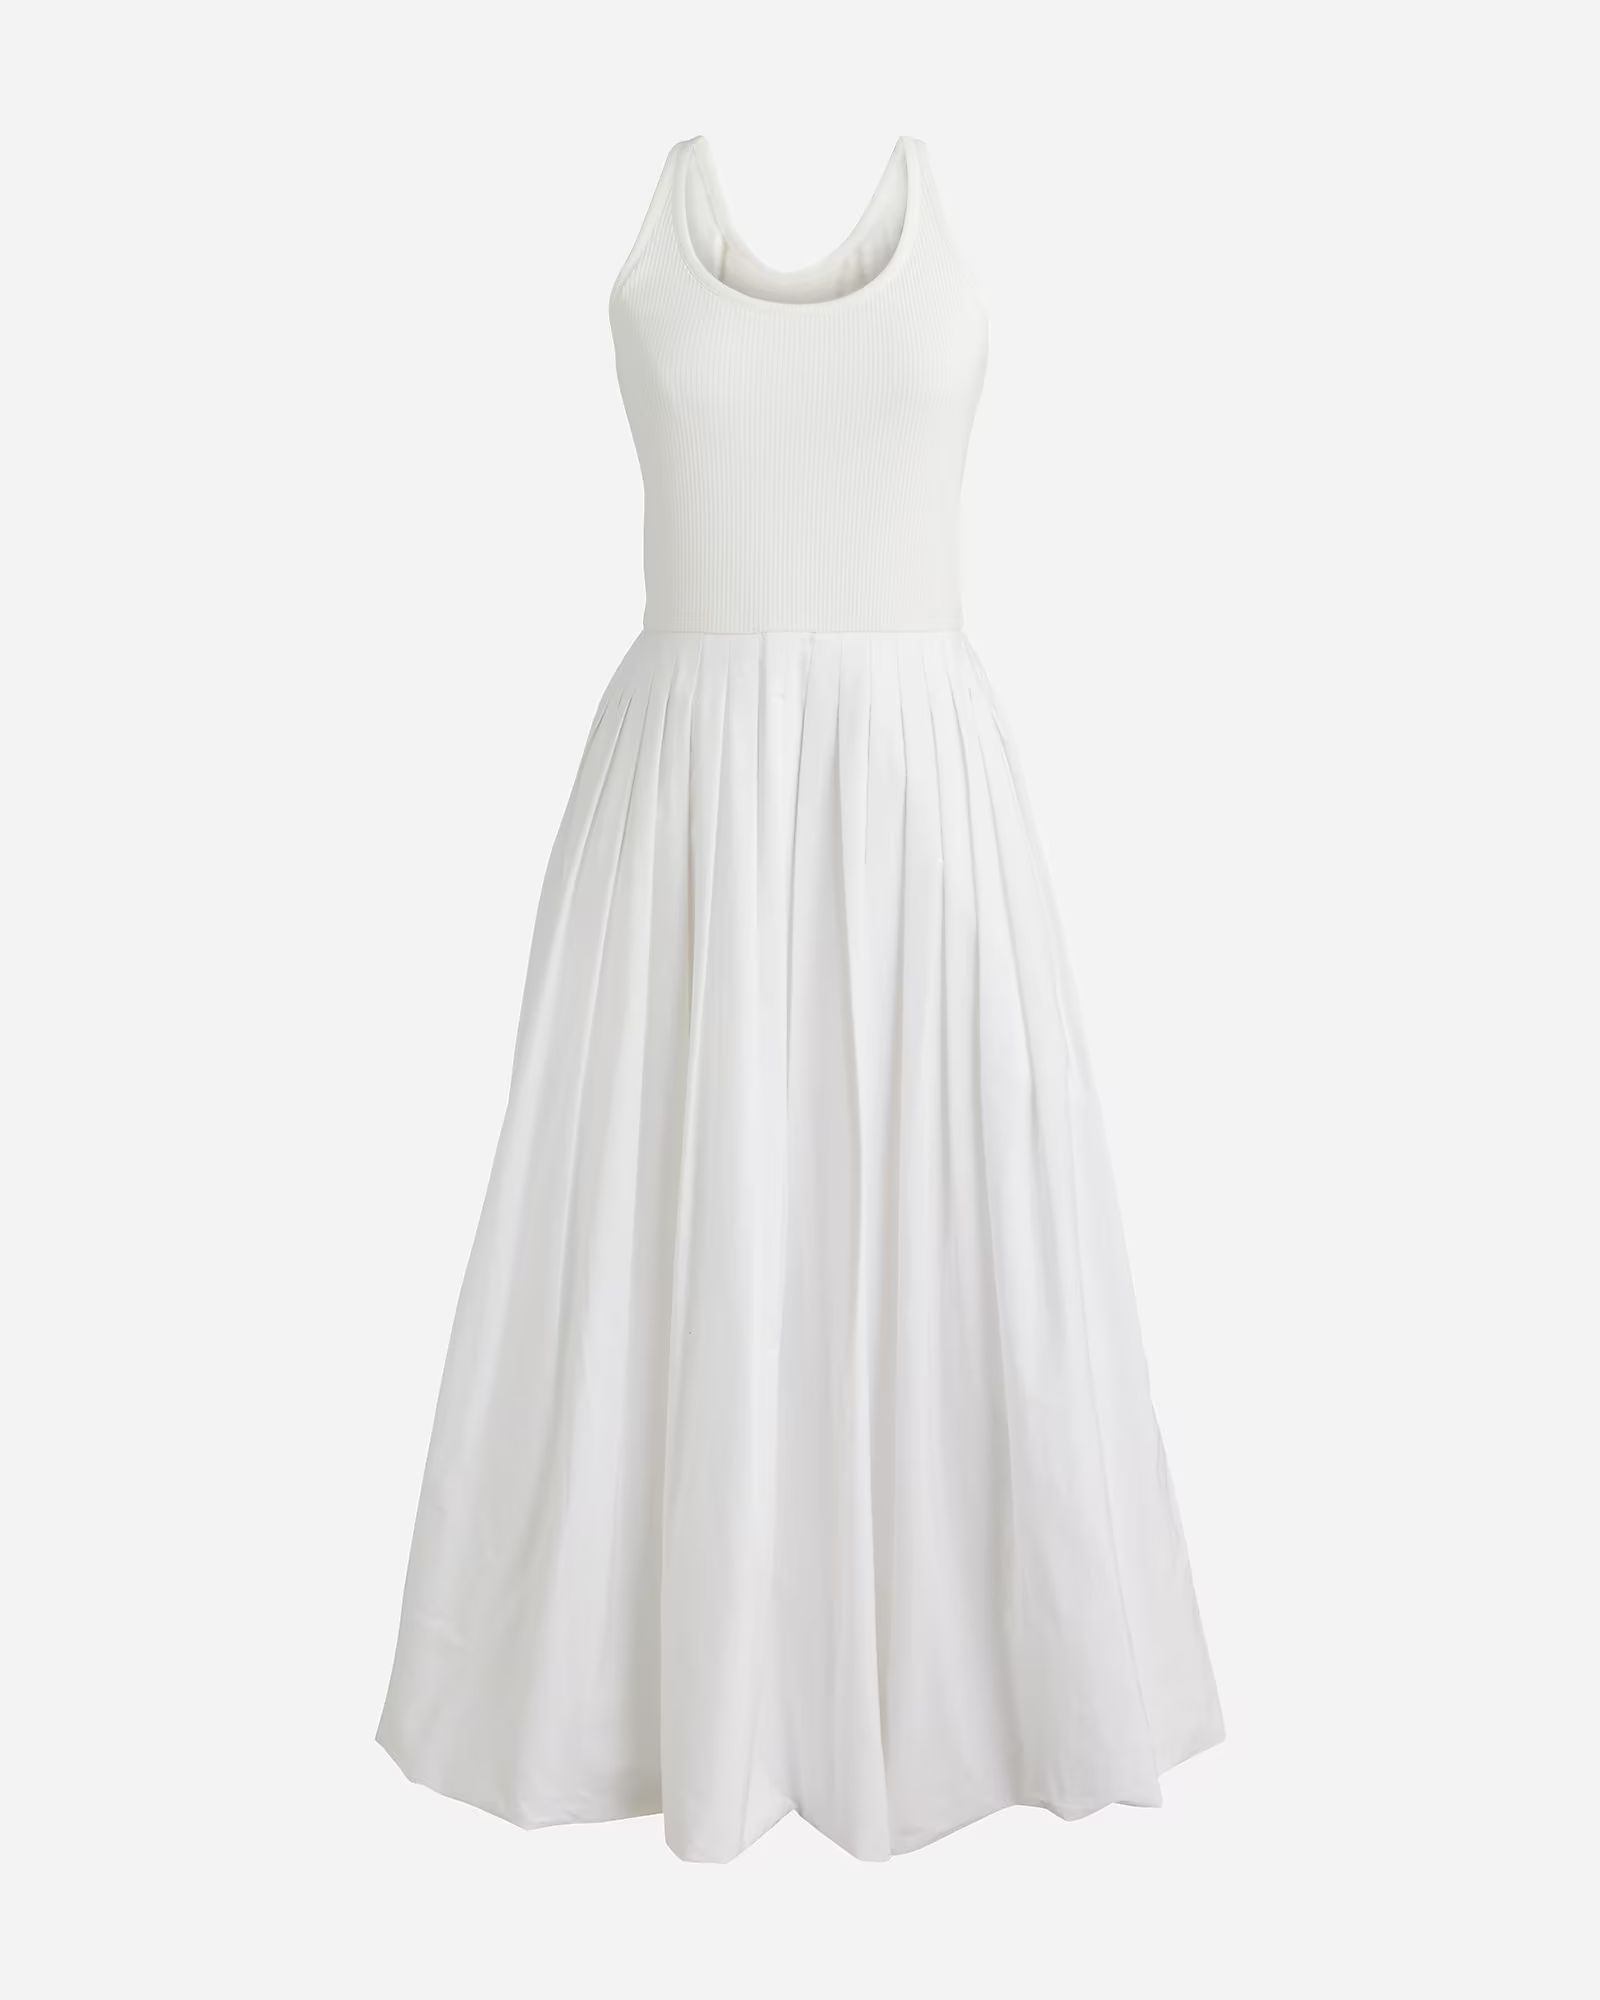 Fitted tank dress with poplin bubble skirt | J.Crew US